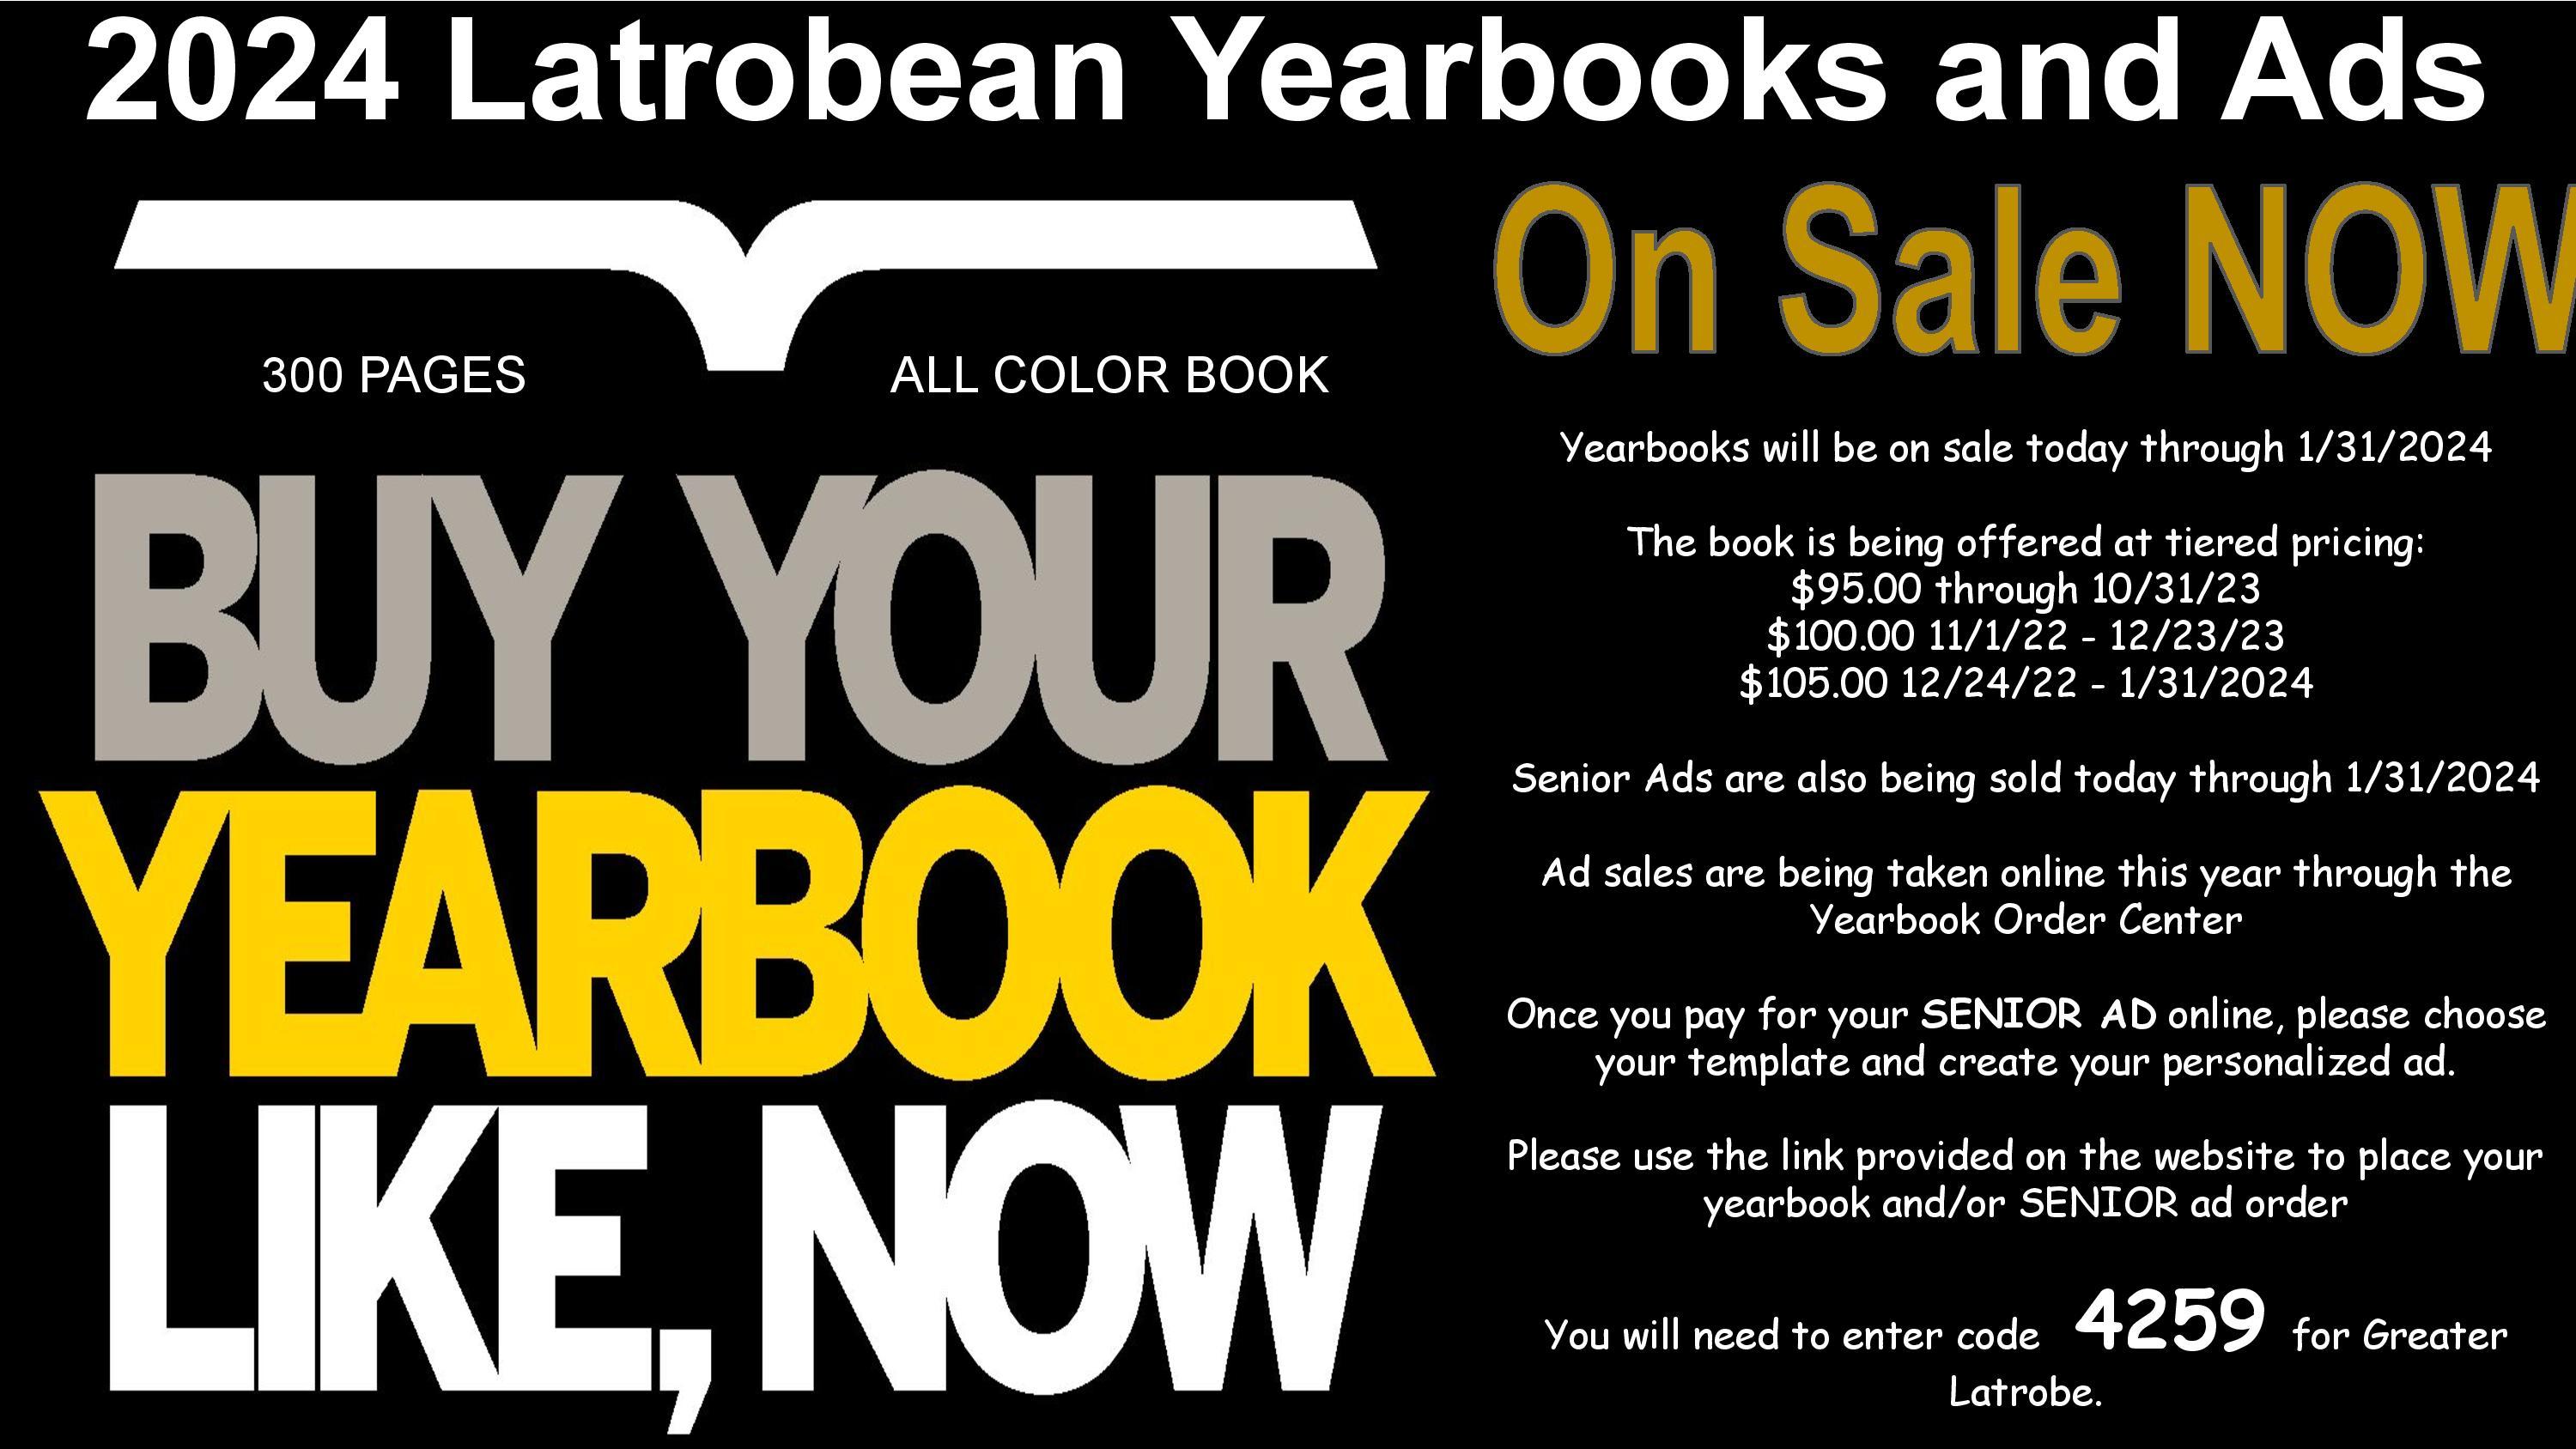 Yearbook and Ad Sales